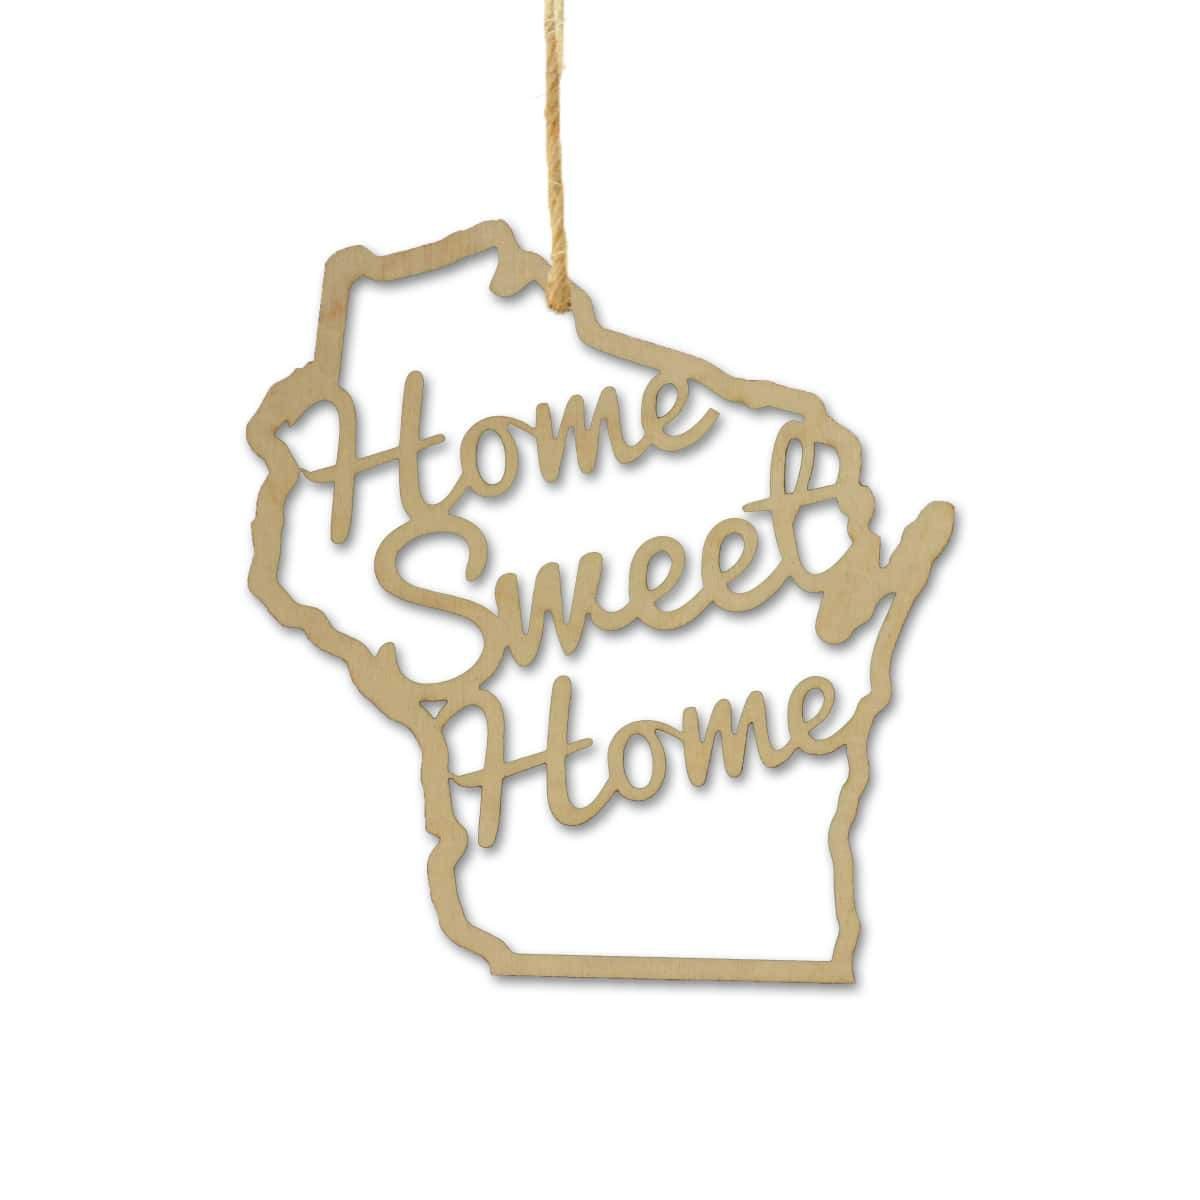 Torched Products Ornaments Wisconsin Home Sweet Home Ornaments (781225361525)